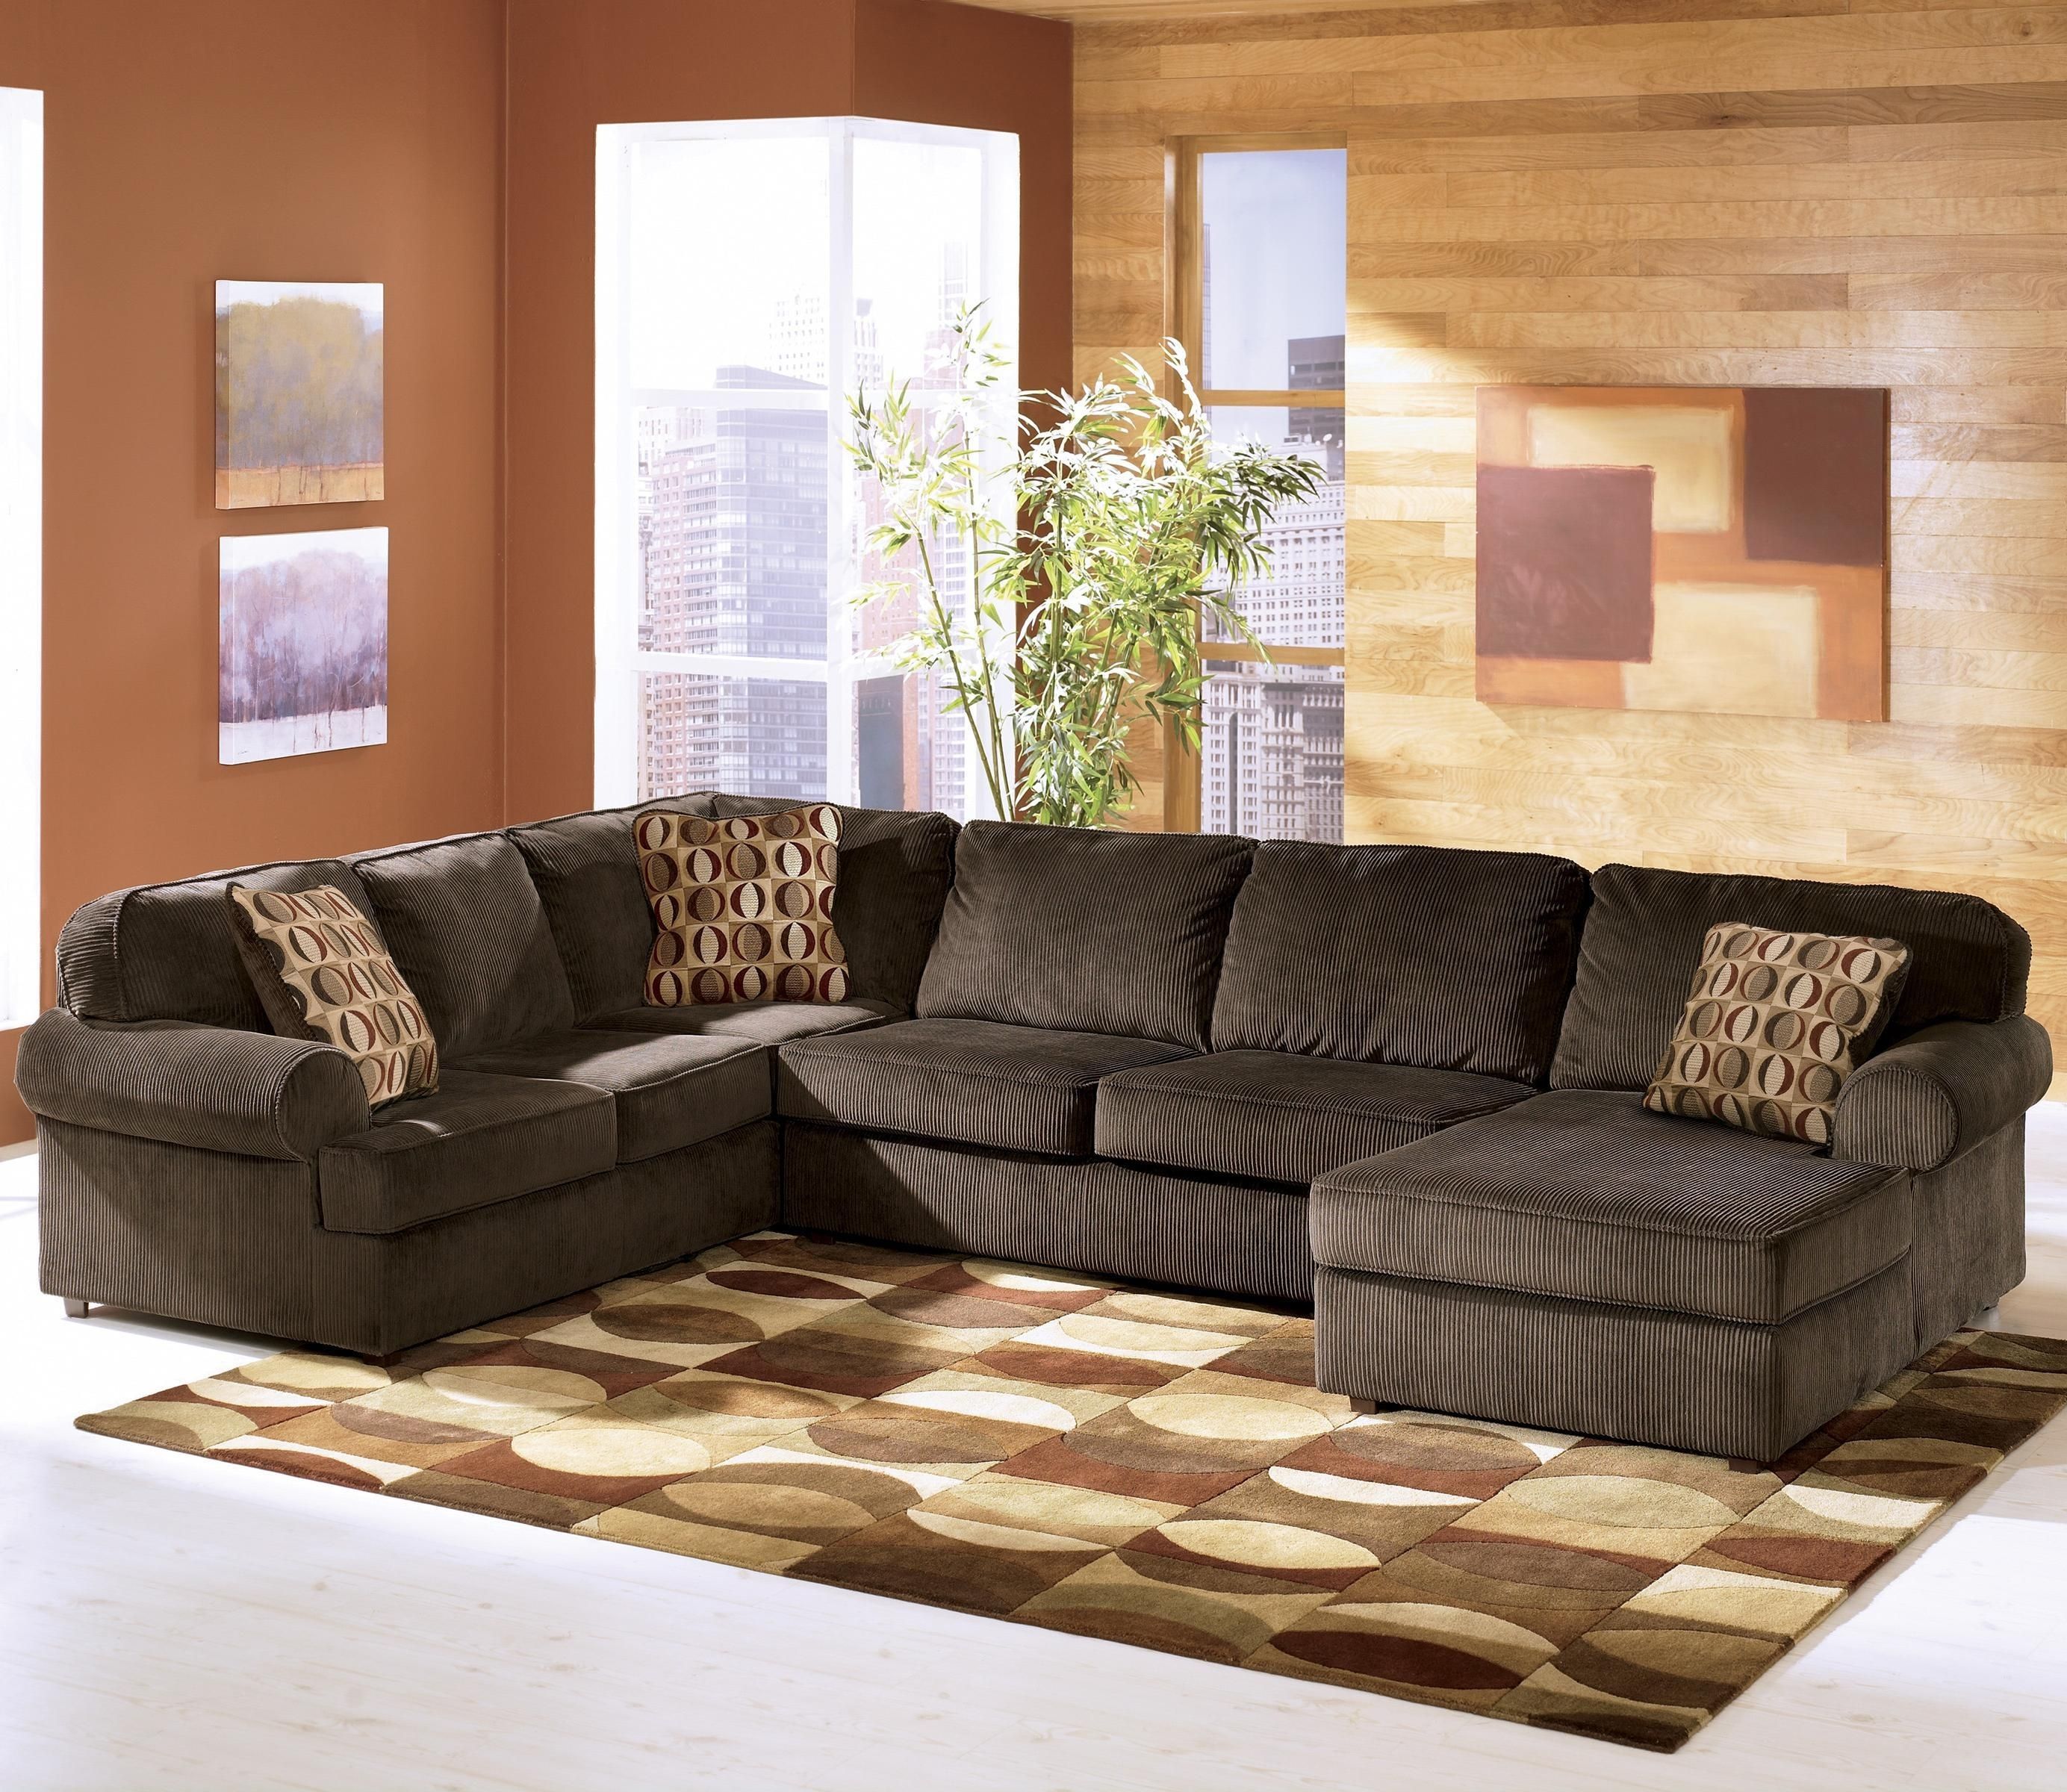 Featured Photo of 20 Photos Wilmington Nc Sectional Sofas